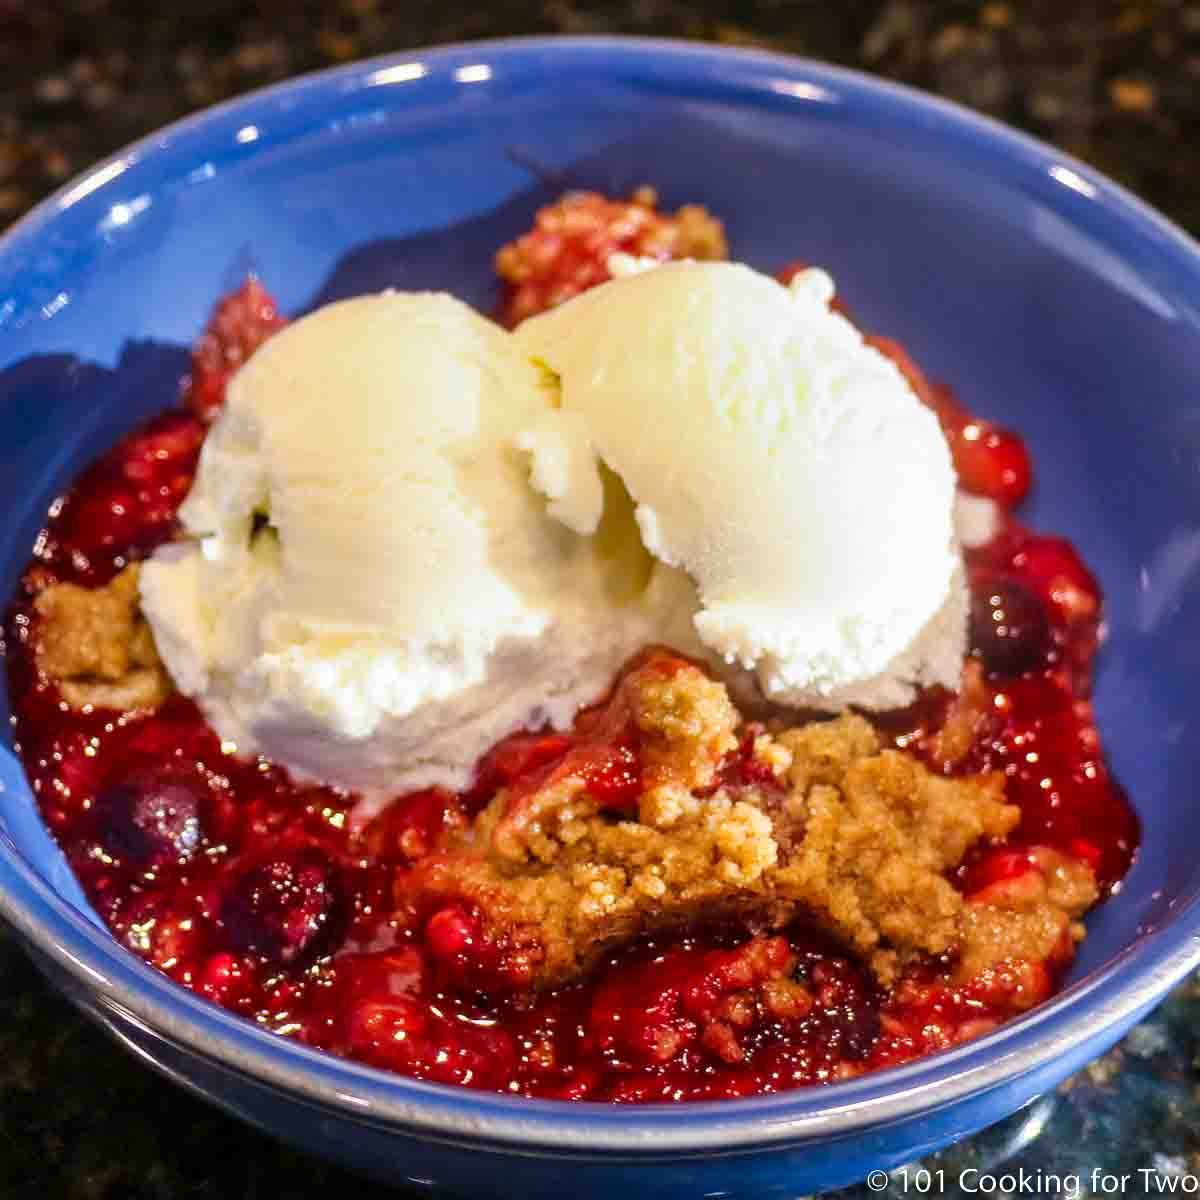 blue bowl of apple berry crumble with ice cream.